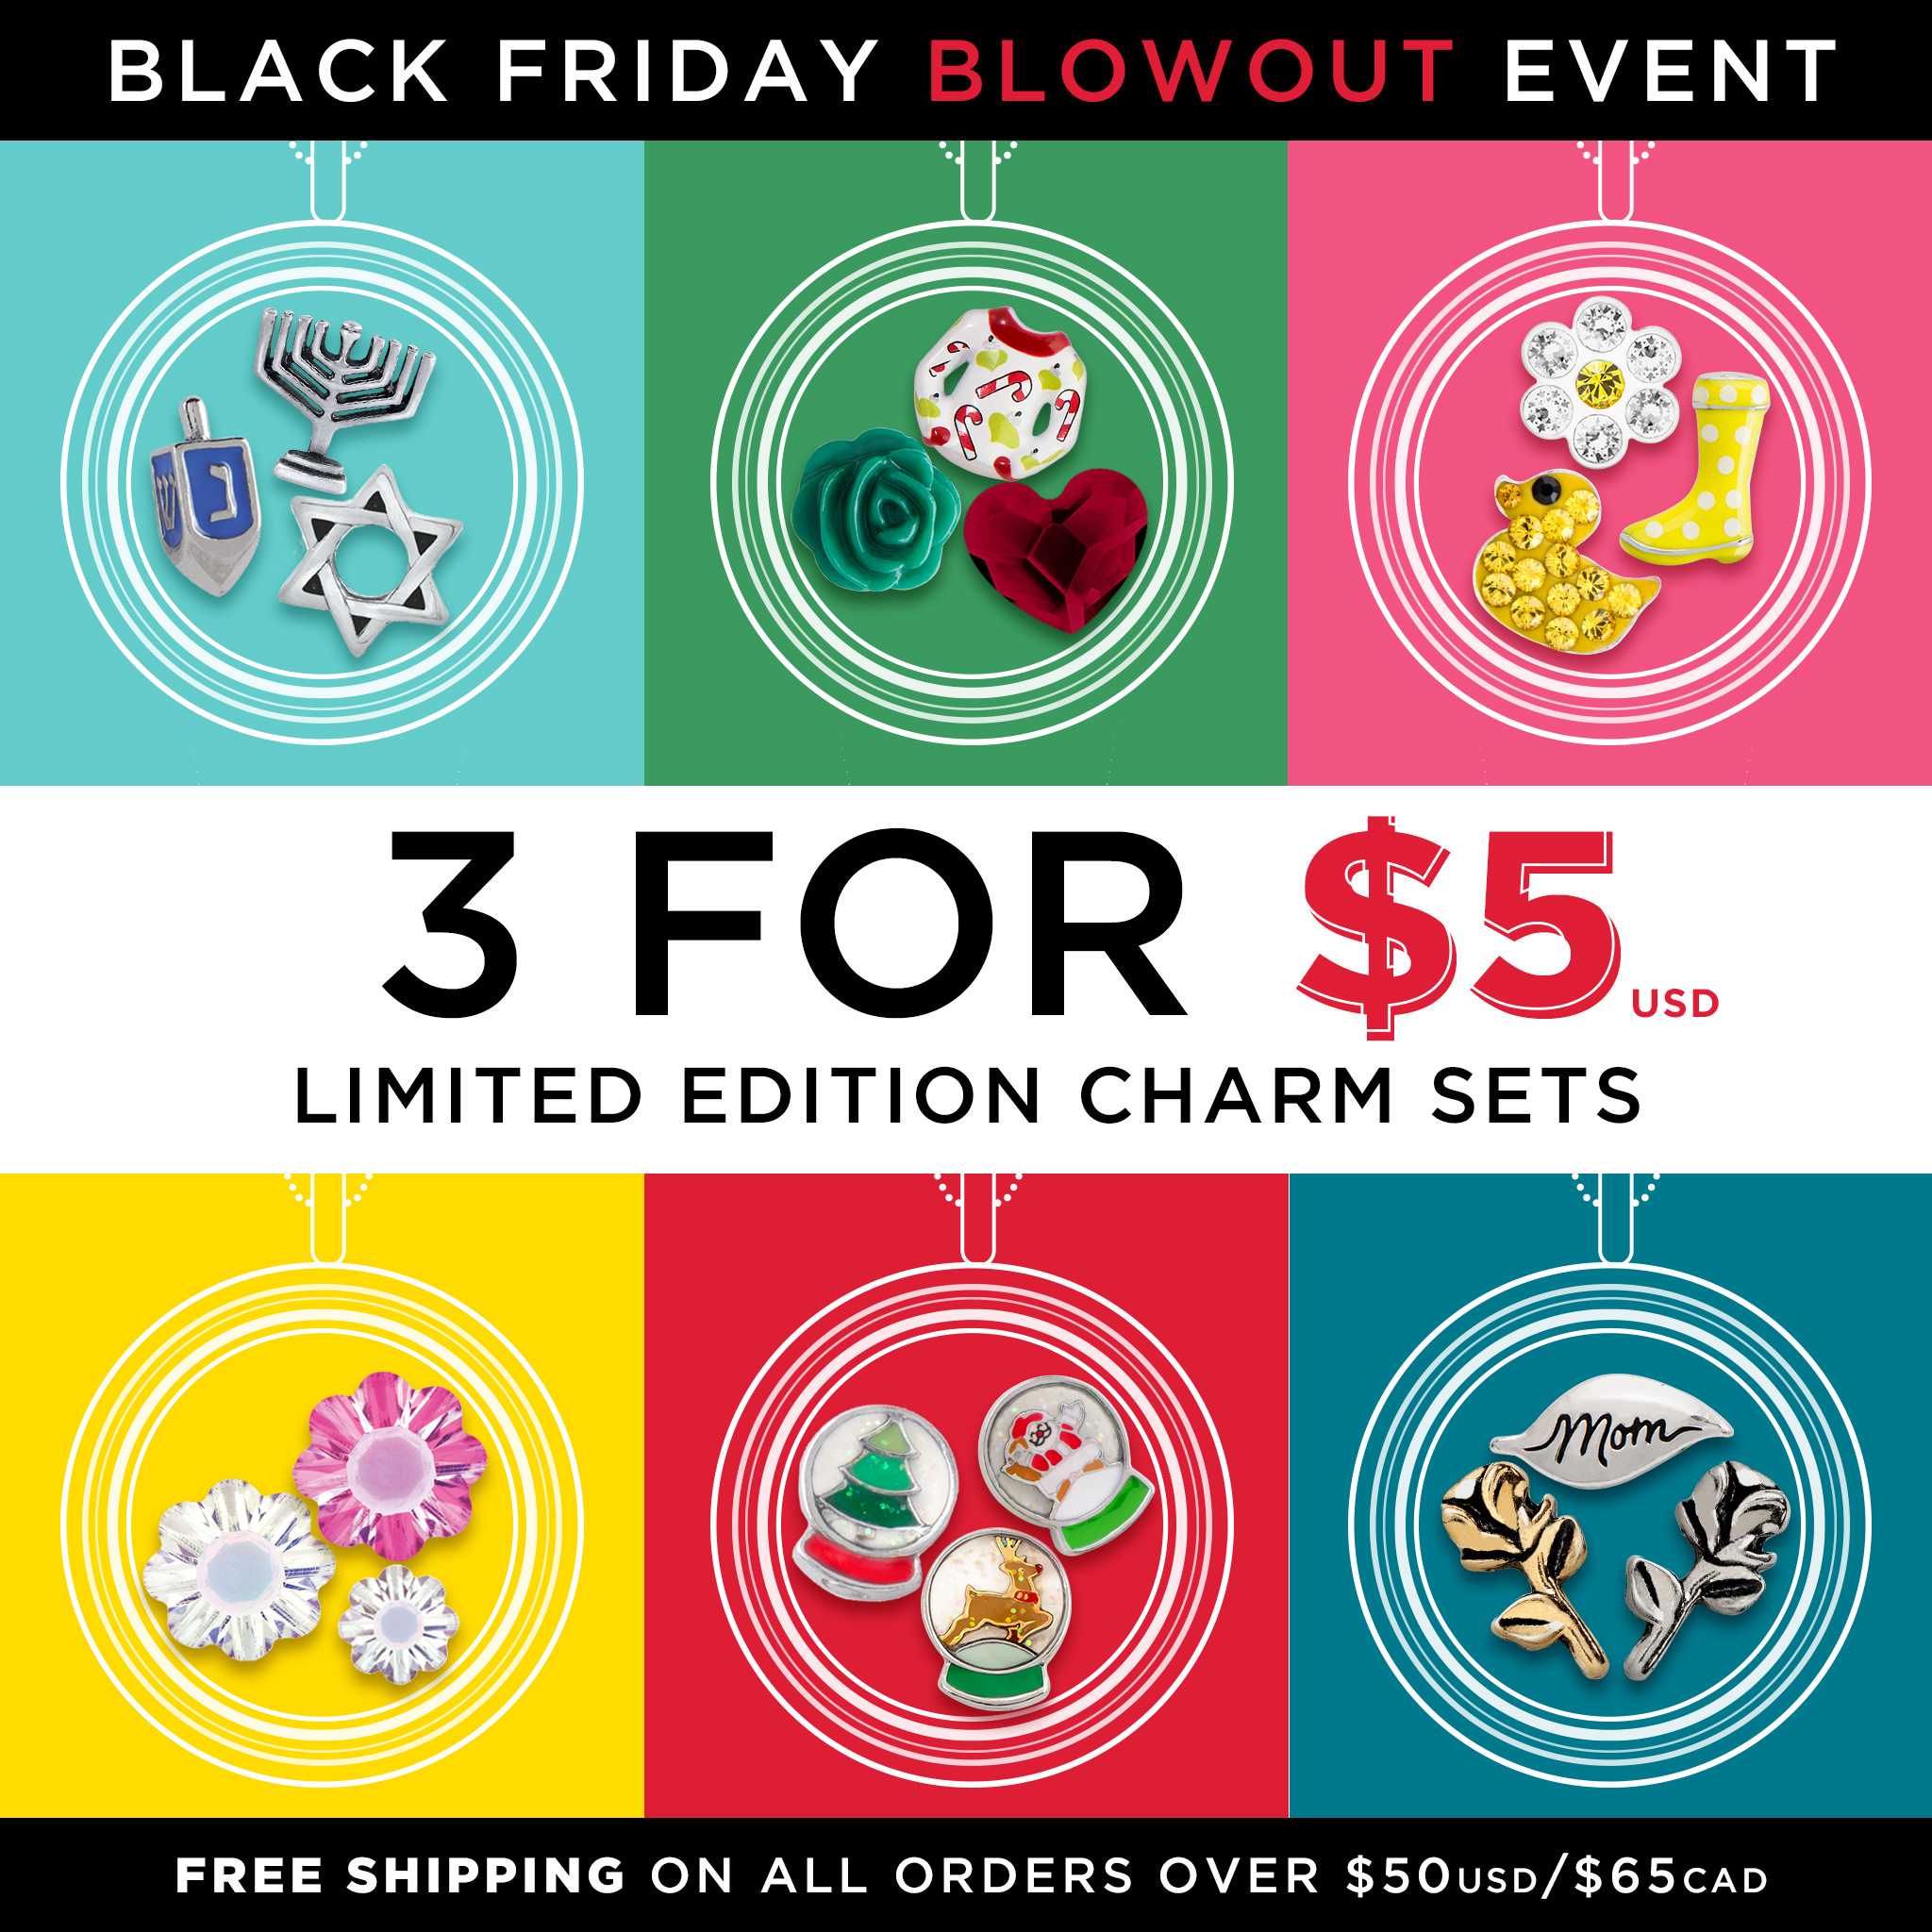 Origami Owl Free Shipping Origami Owl Black Friday 2017 90 Off Free Shipping Direct